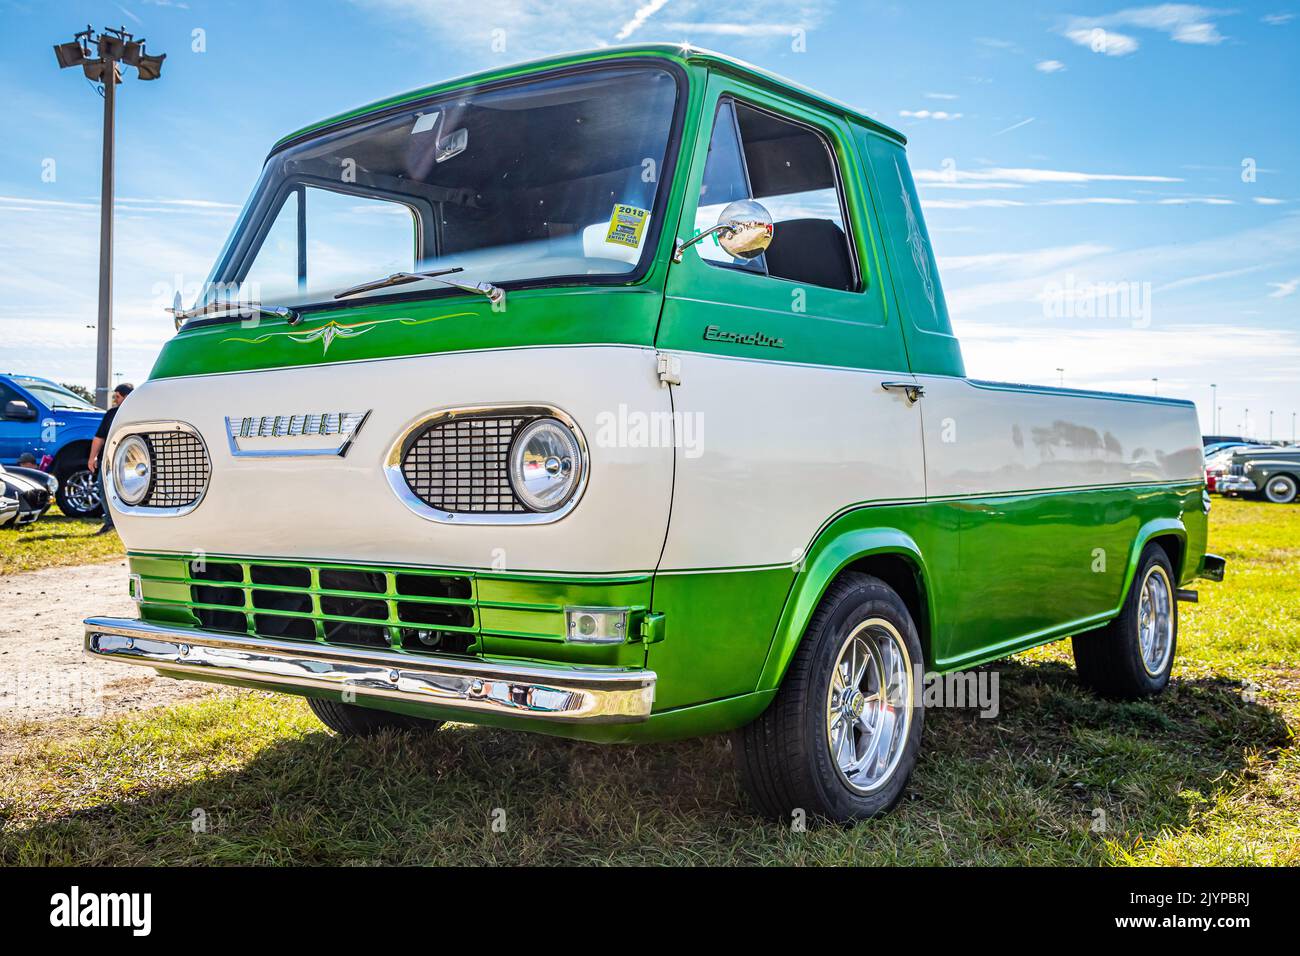 Daytona Beach, FL - November 24, 2018: Low perspective front corner view of a 1964 Mercury Econoline Pickup Truck at a local car show. Stock Photo